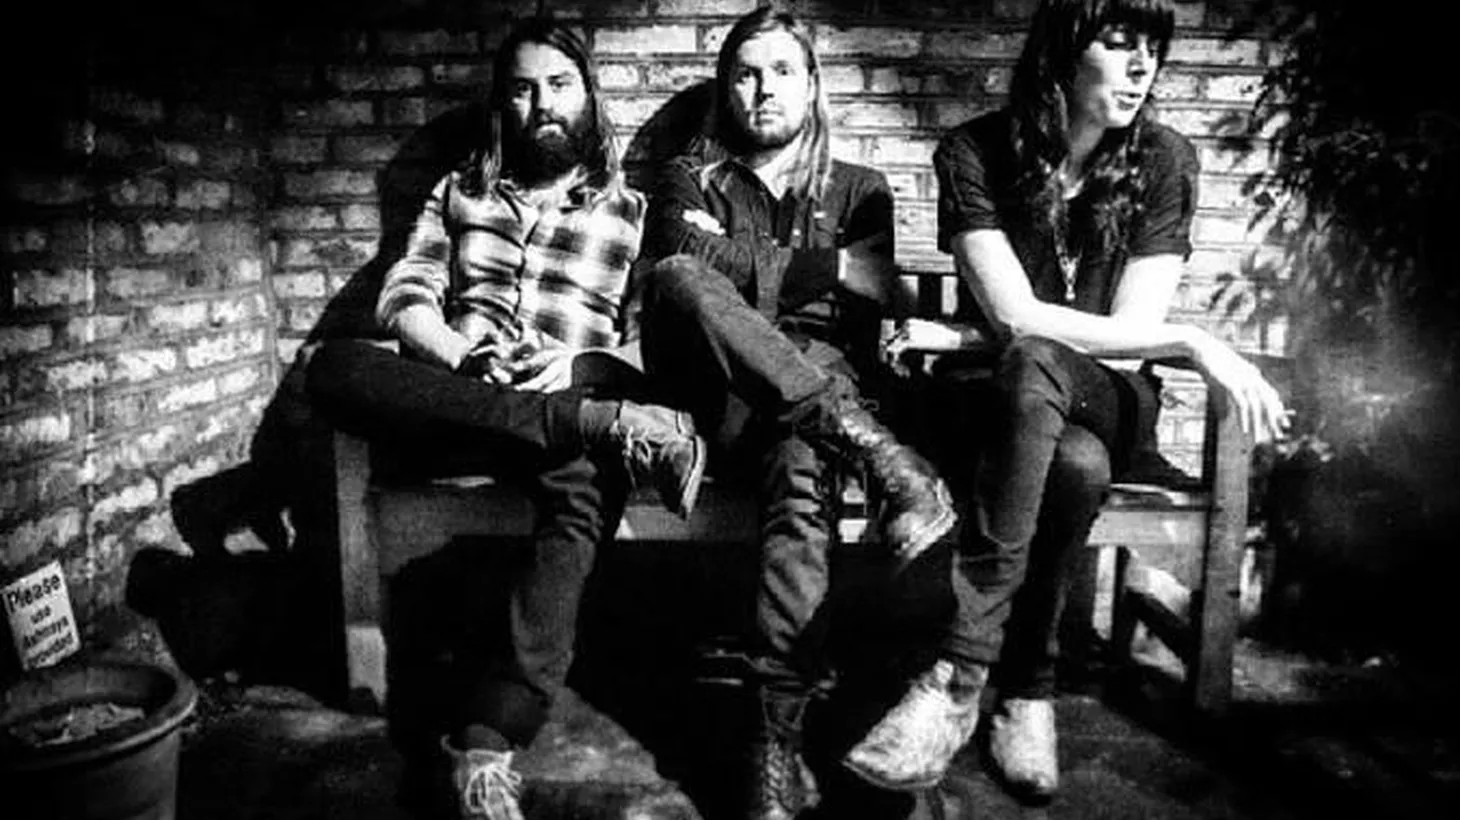 UK-based power trio Band of Skulls returned to our studios behind their third album, Himalayan.